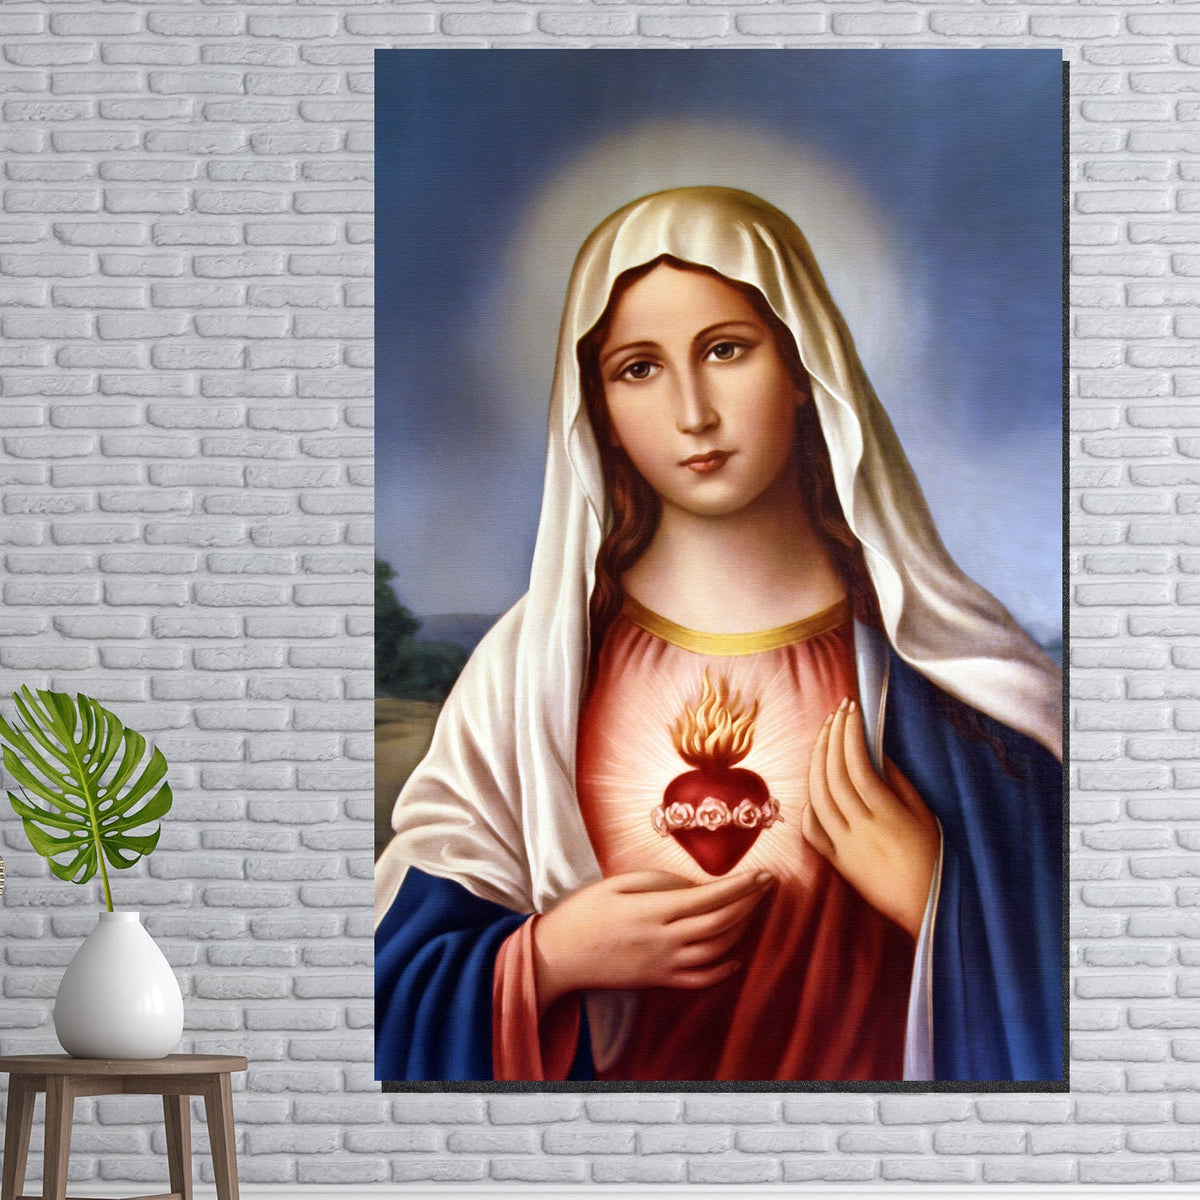 https://cdn.shopify.com/s/files/1/0387/9986/8044/products/OurLadyoftheSacredHeartCanvasArtprintStretched-1.jpg